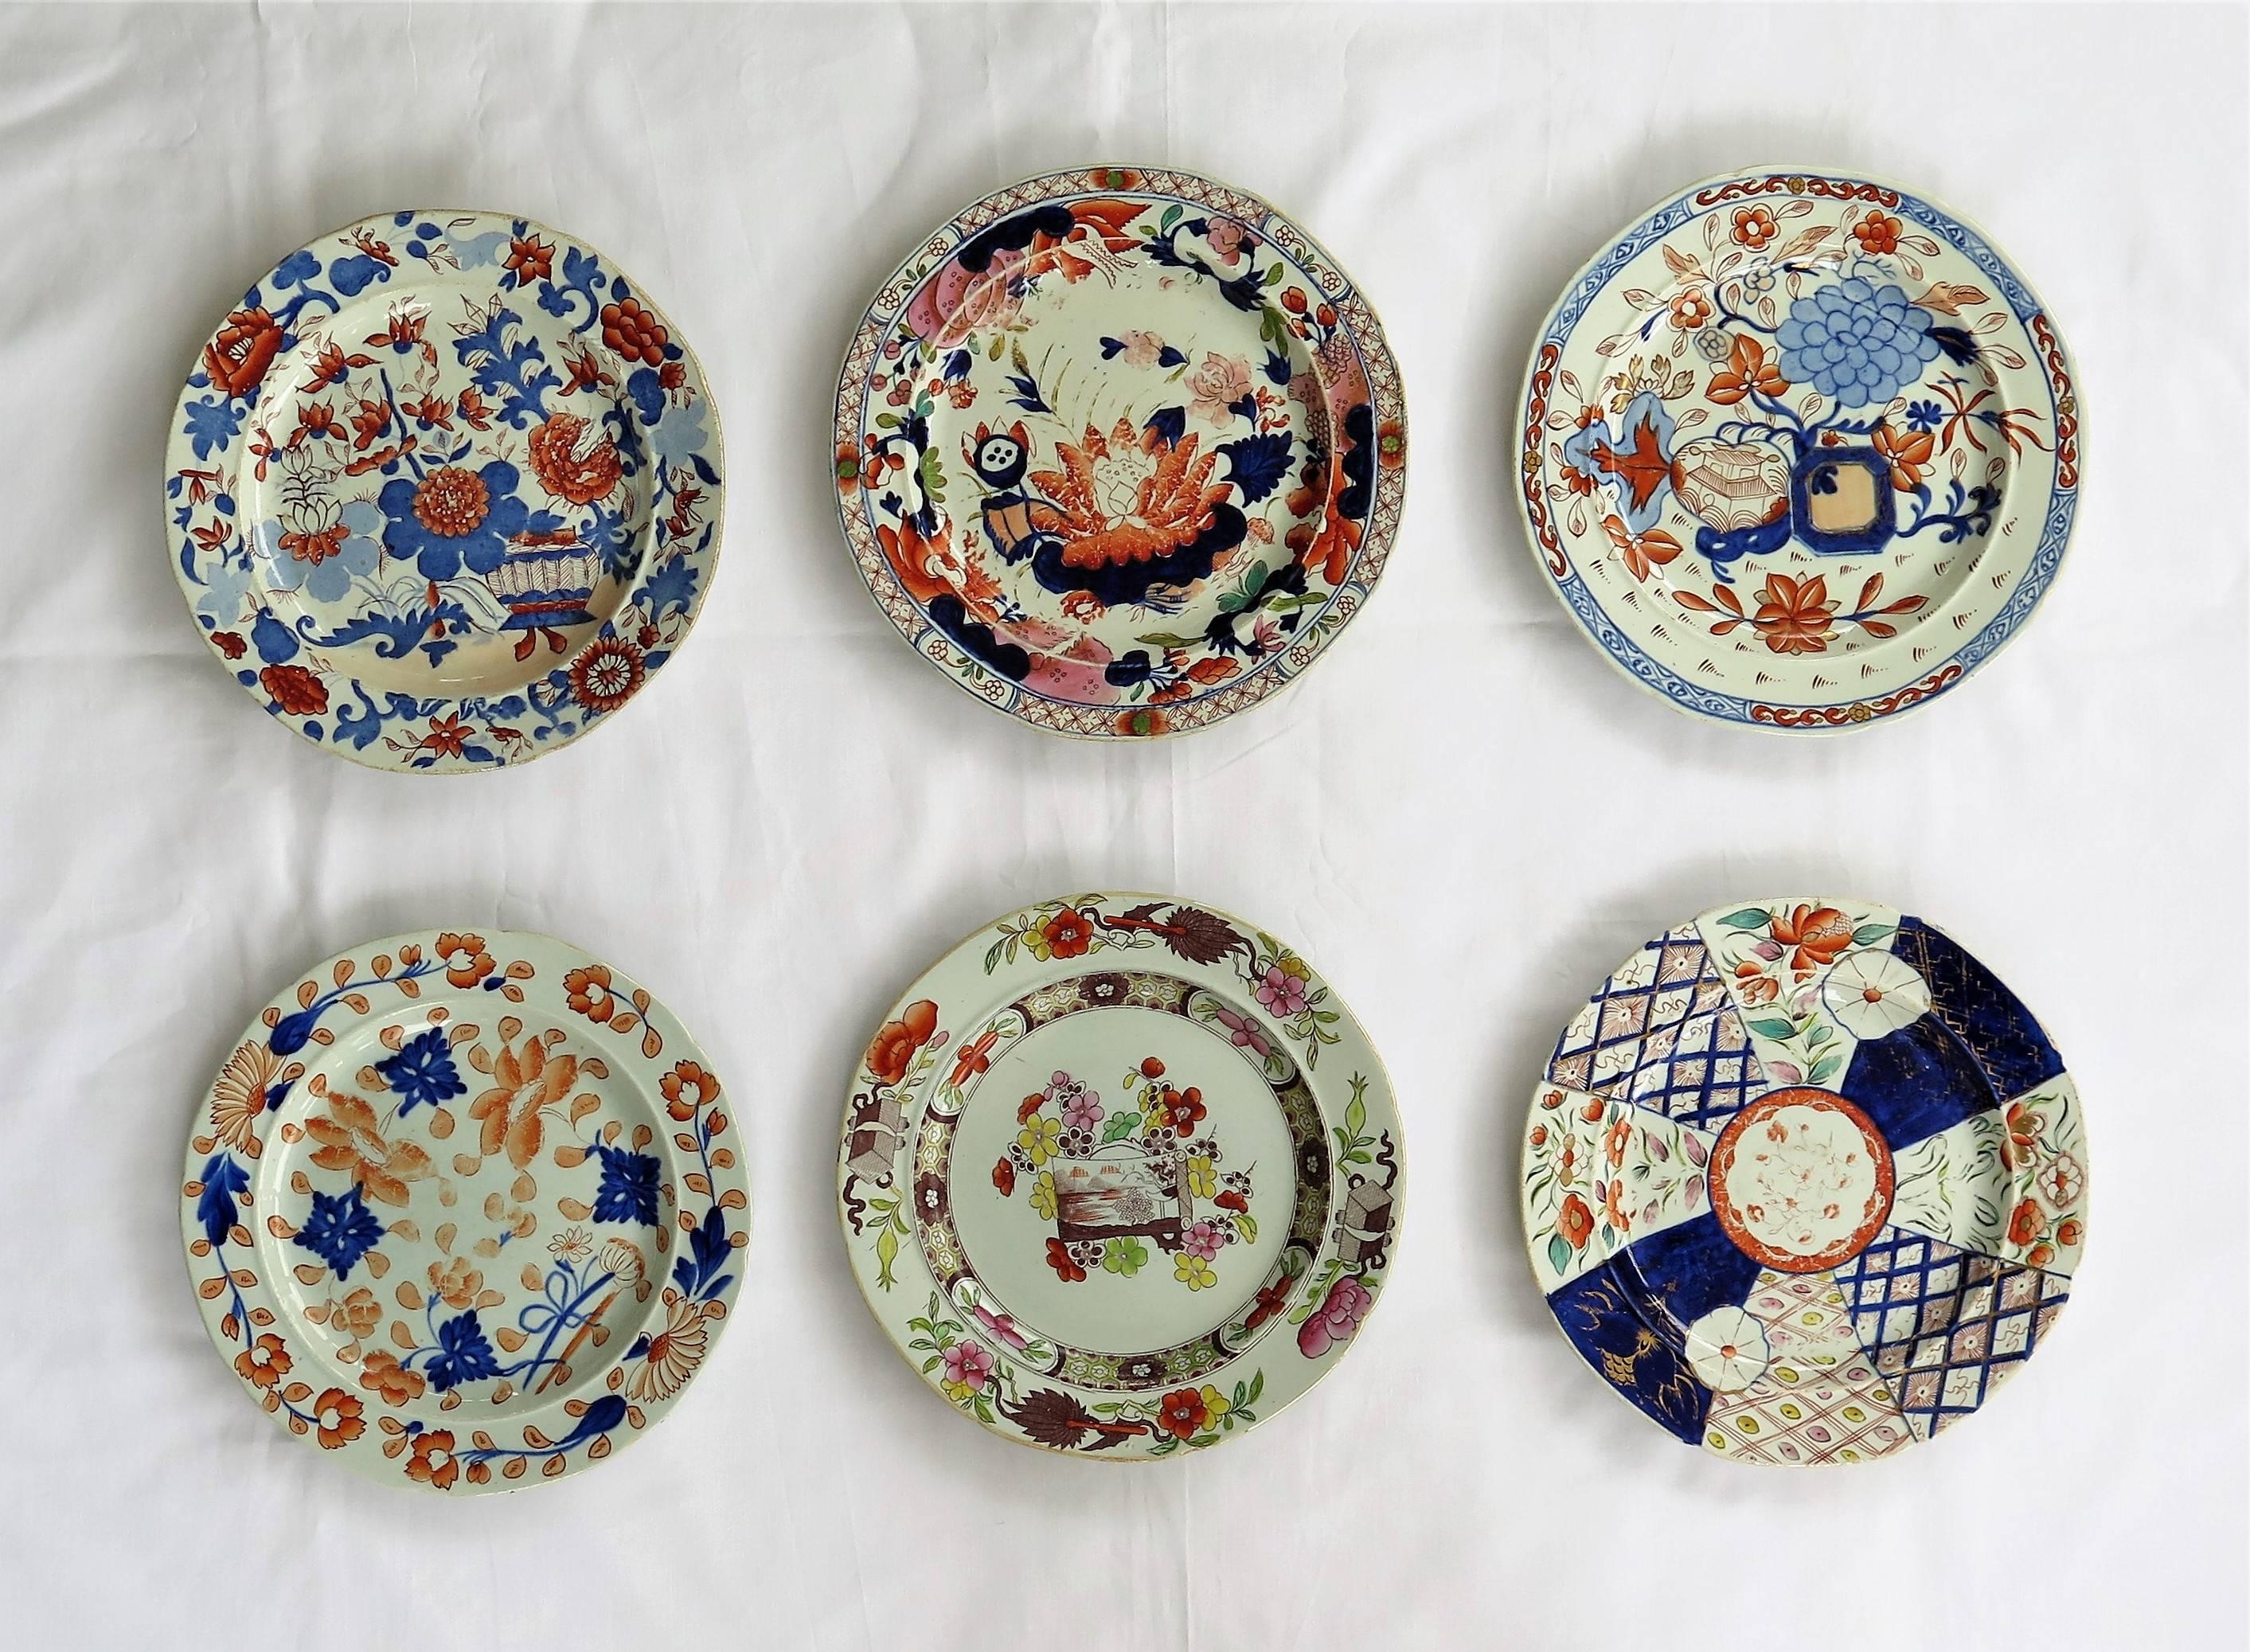 This is a harlequin set of six Mason's ironstone plates, all dating to the earliest period between 1813 and 1820. 

All the plates are the same nominal size and shape, but have different patterns and base marks as follows; 

Top row left: Japan